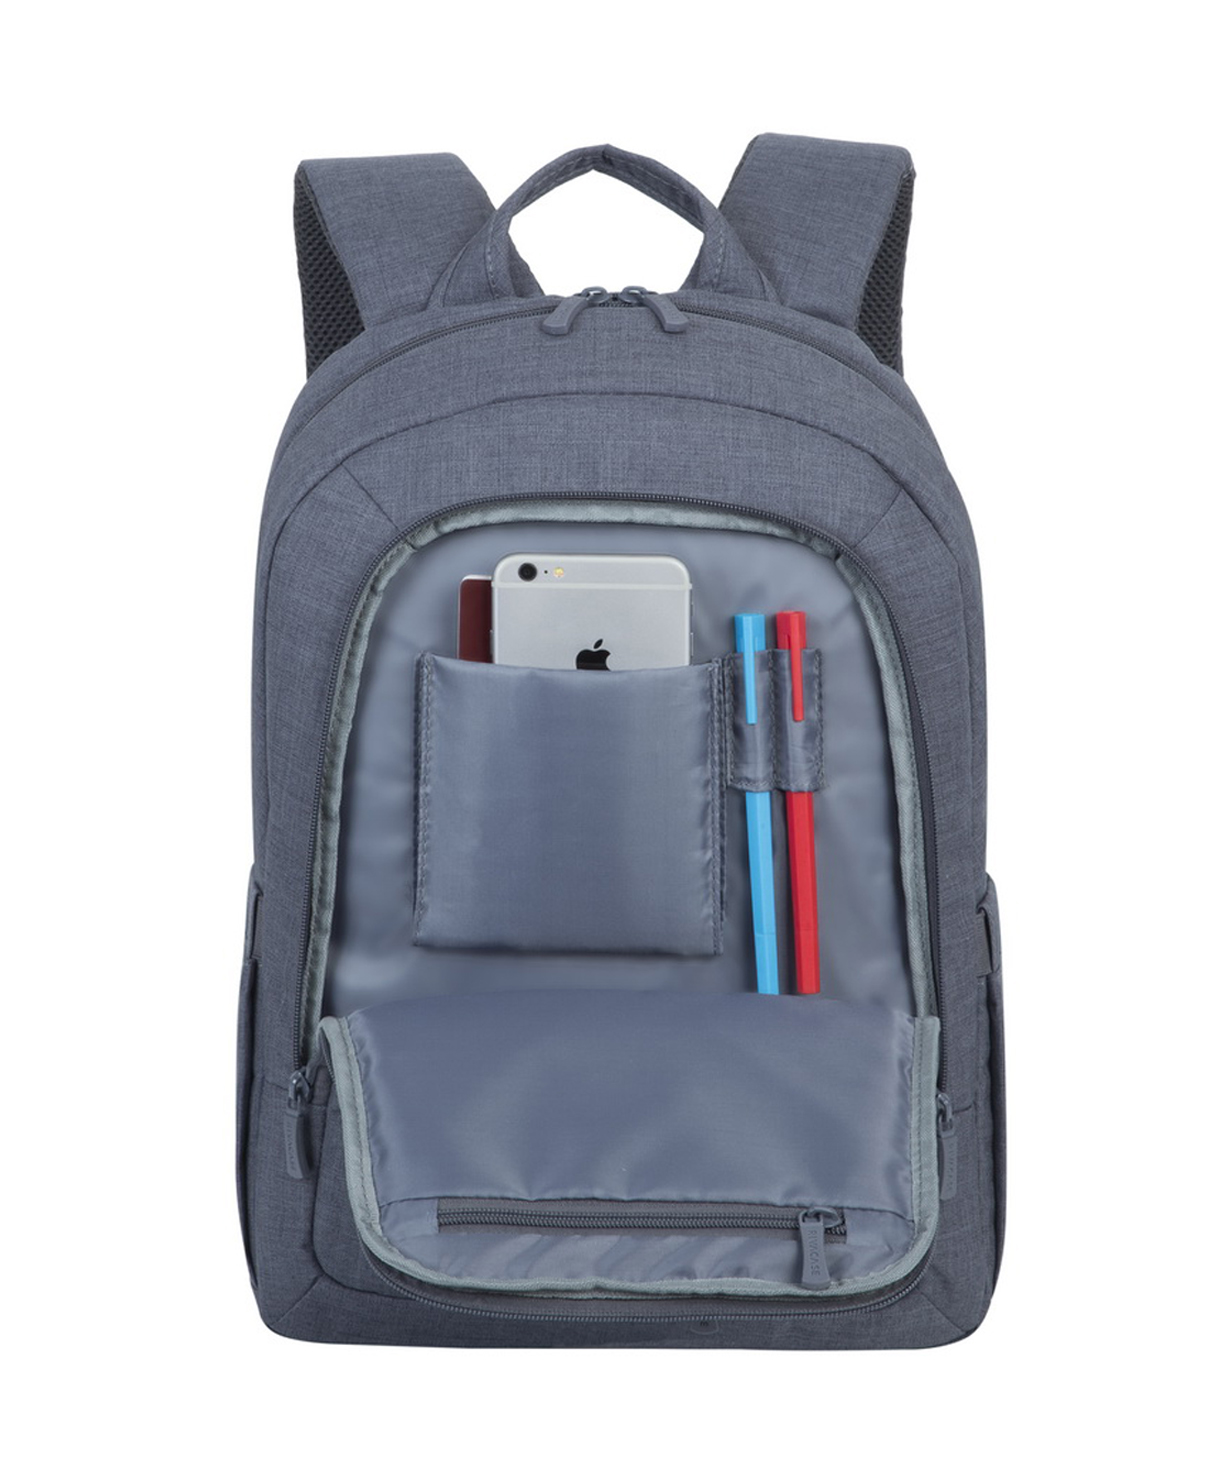 Rivacase 7560 Laptop Backpack (15.6`, Gray)